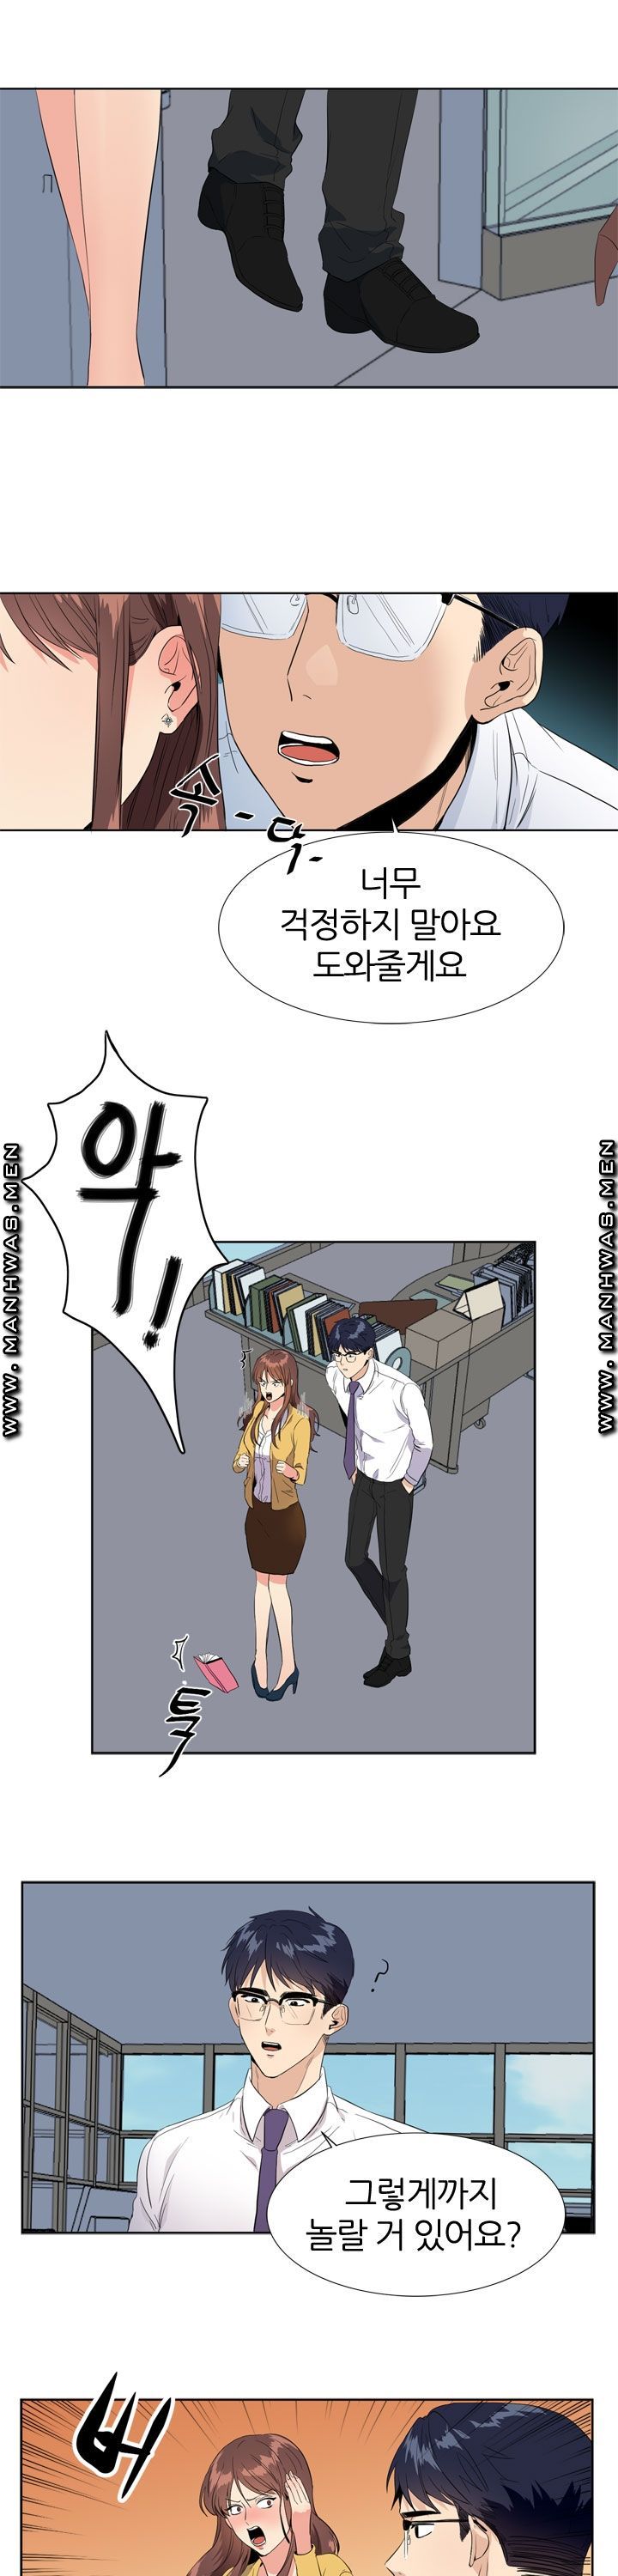 Memory of July Raw - Chapter 6 Page 12